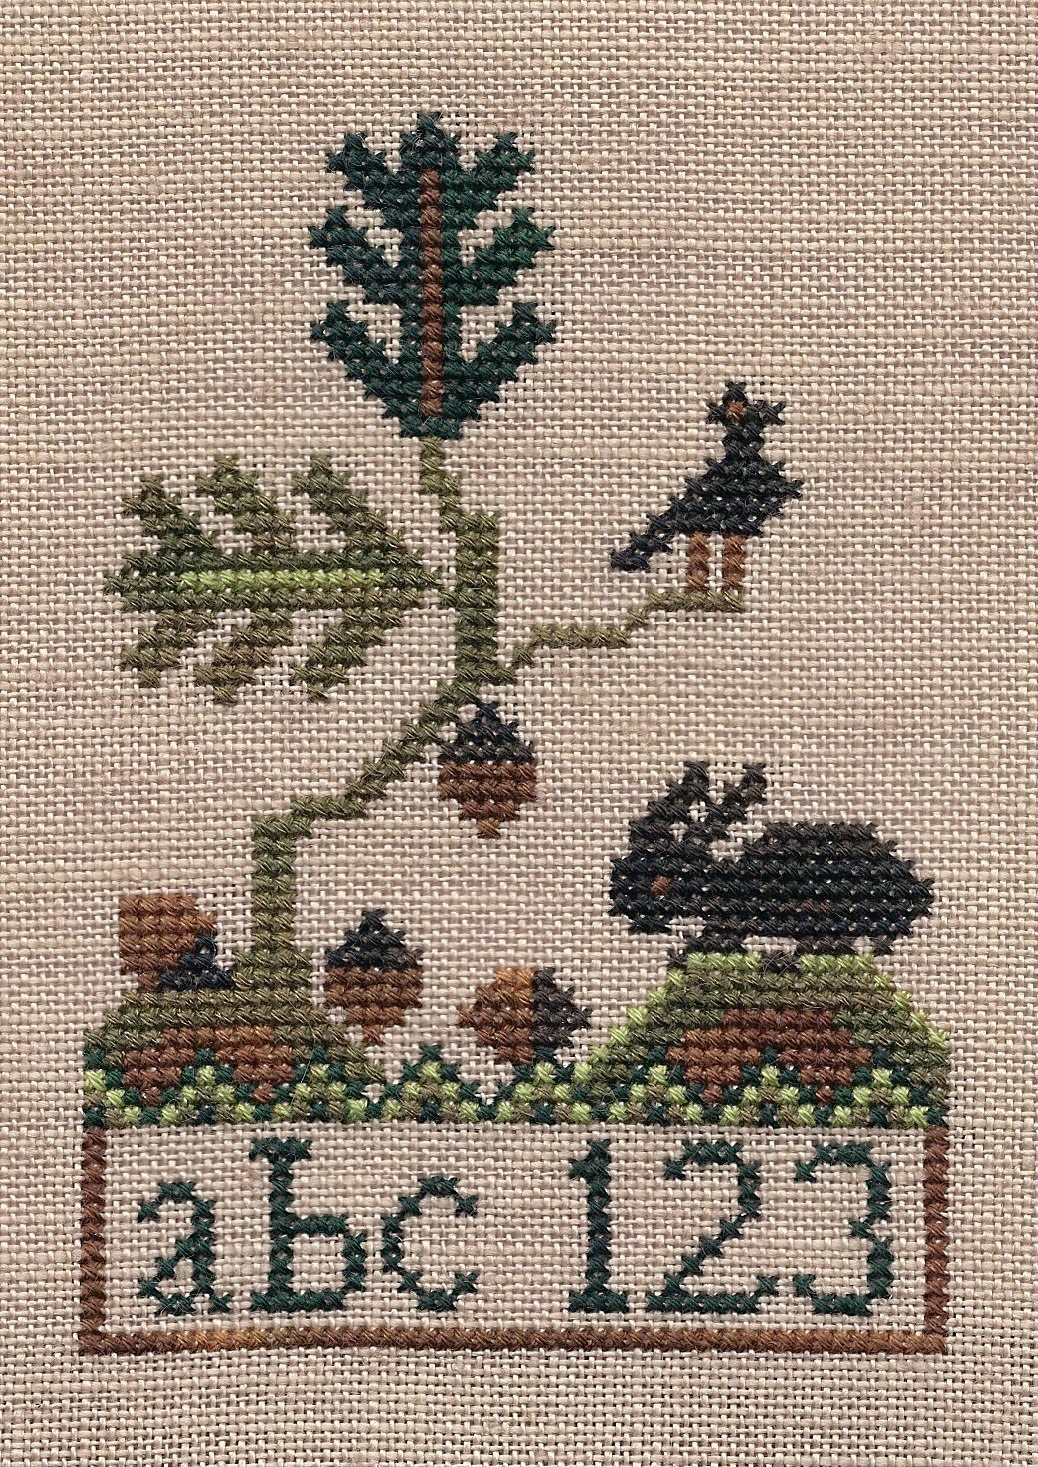 Garden Grumbles and Cross Stitch Fumbles: Continuing with the Rabbit Theme